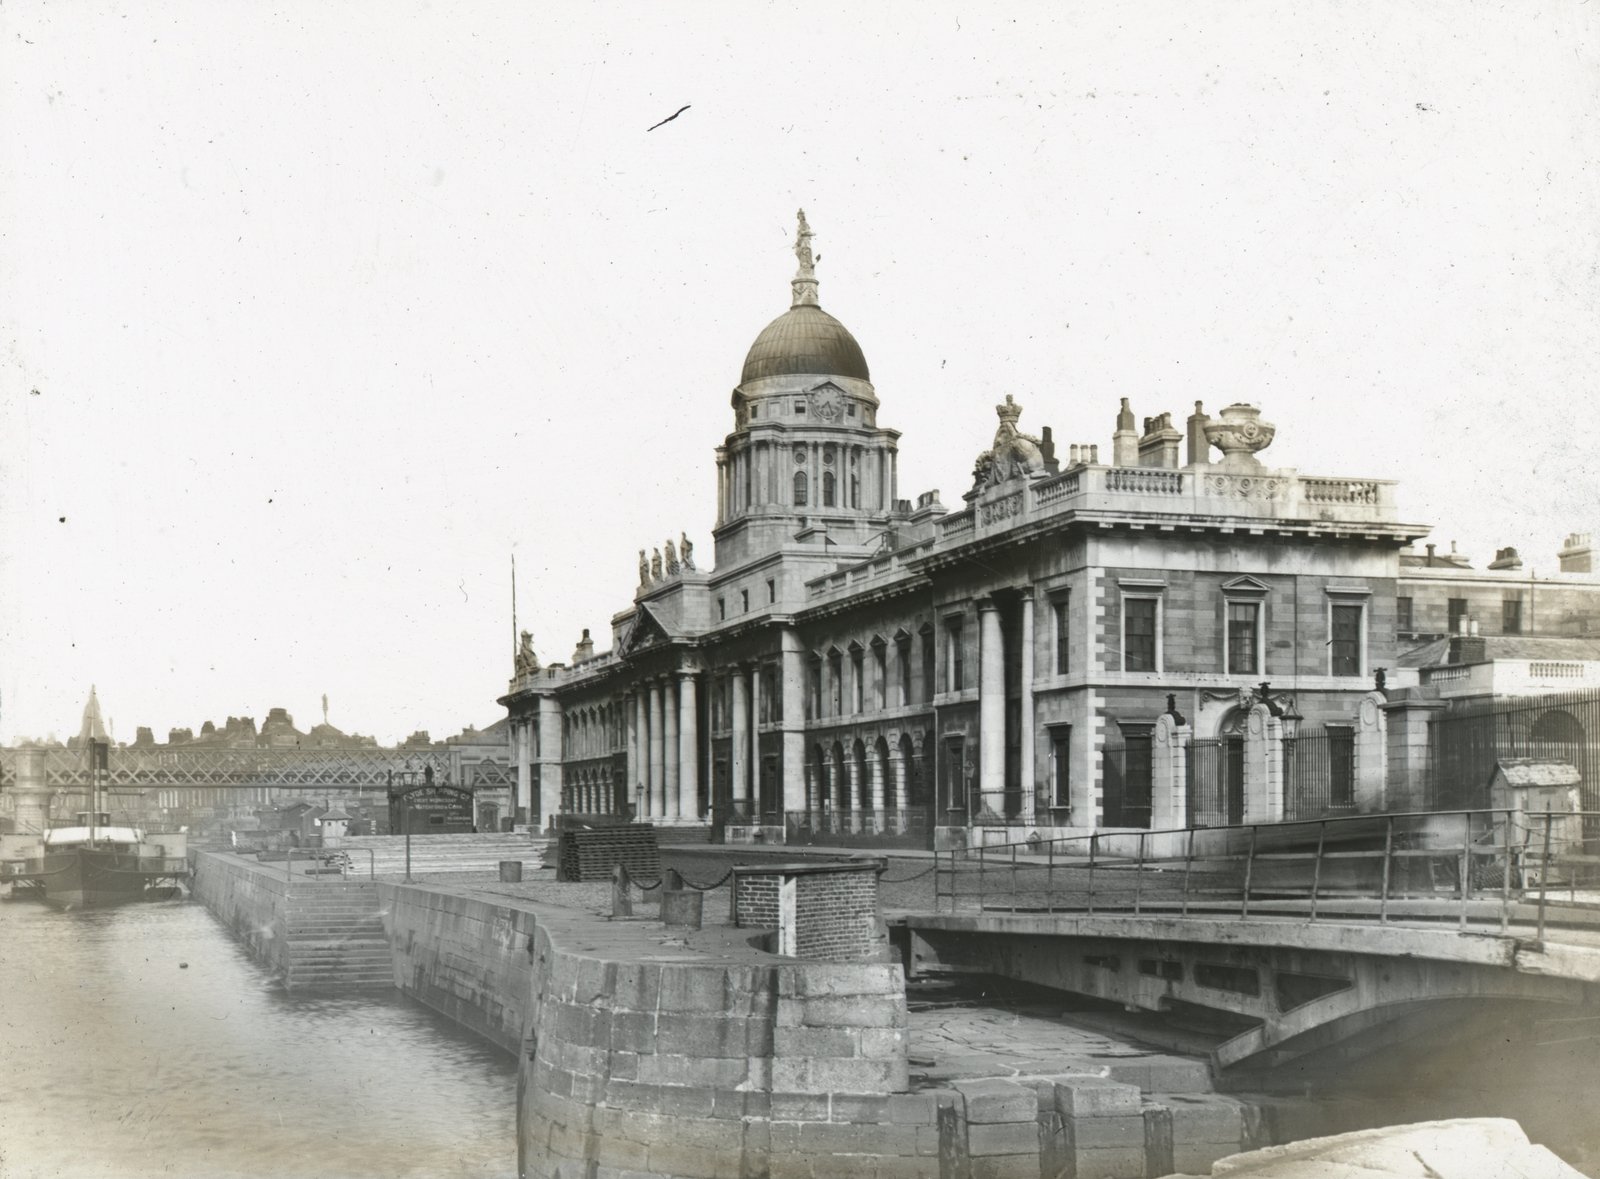 Image - Before the storm: The Custom House, as it would have looked on the morning of 25 May 1921. Credit: South Dublin County Libraries